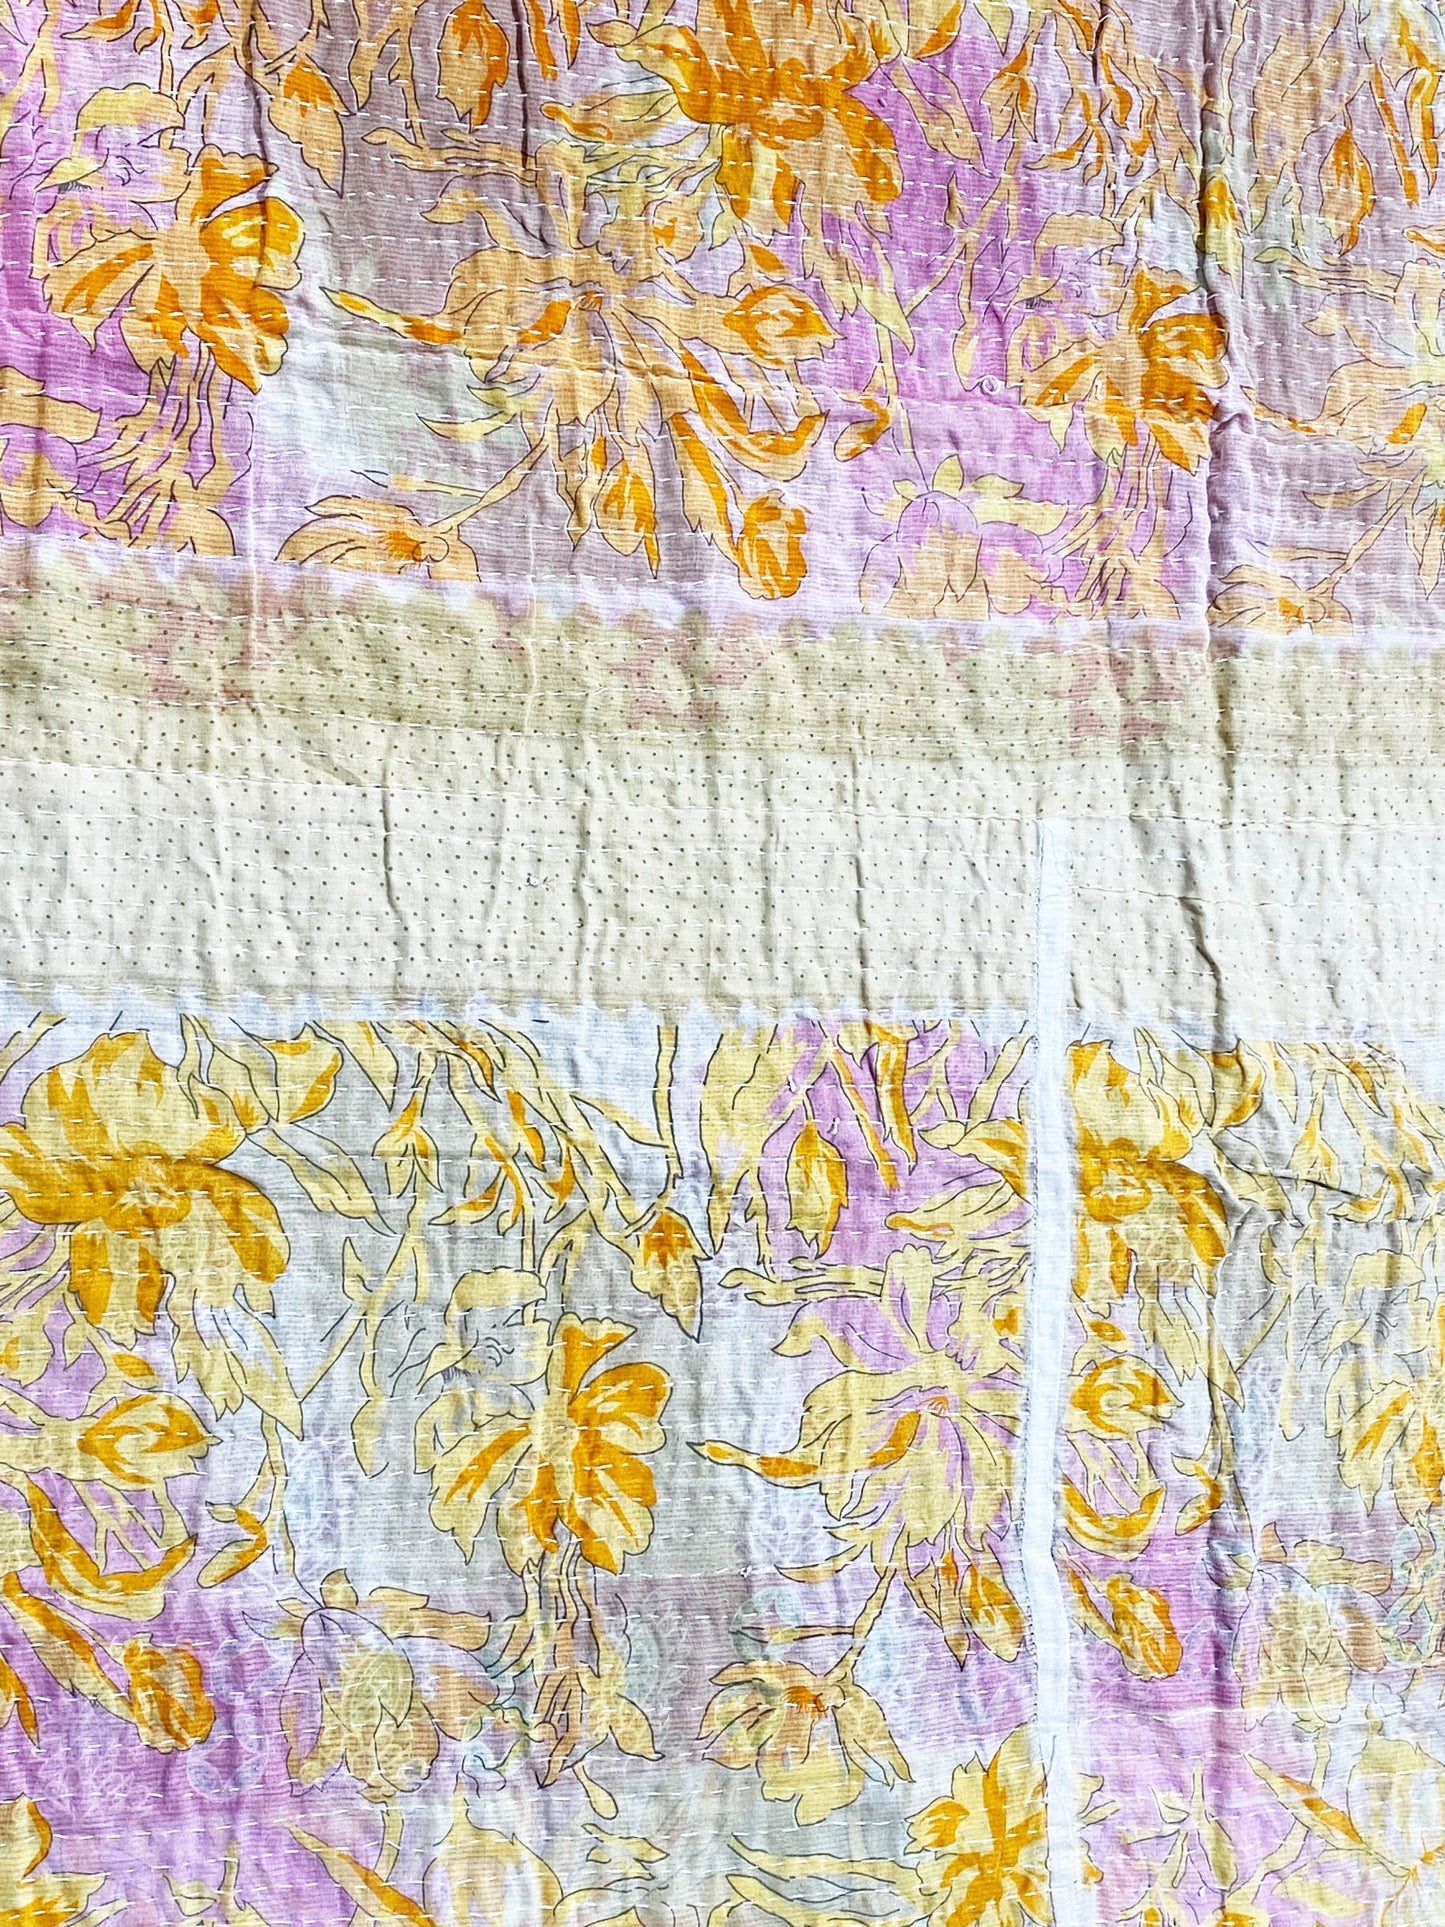 # 5324 Vintage Indian CottonThrow Kantha Quilt 89" by 56"